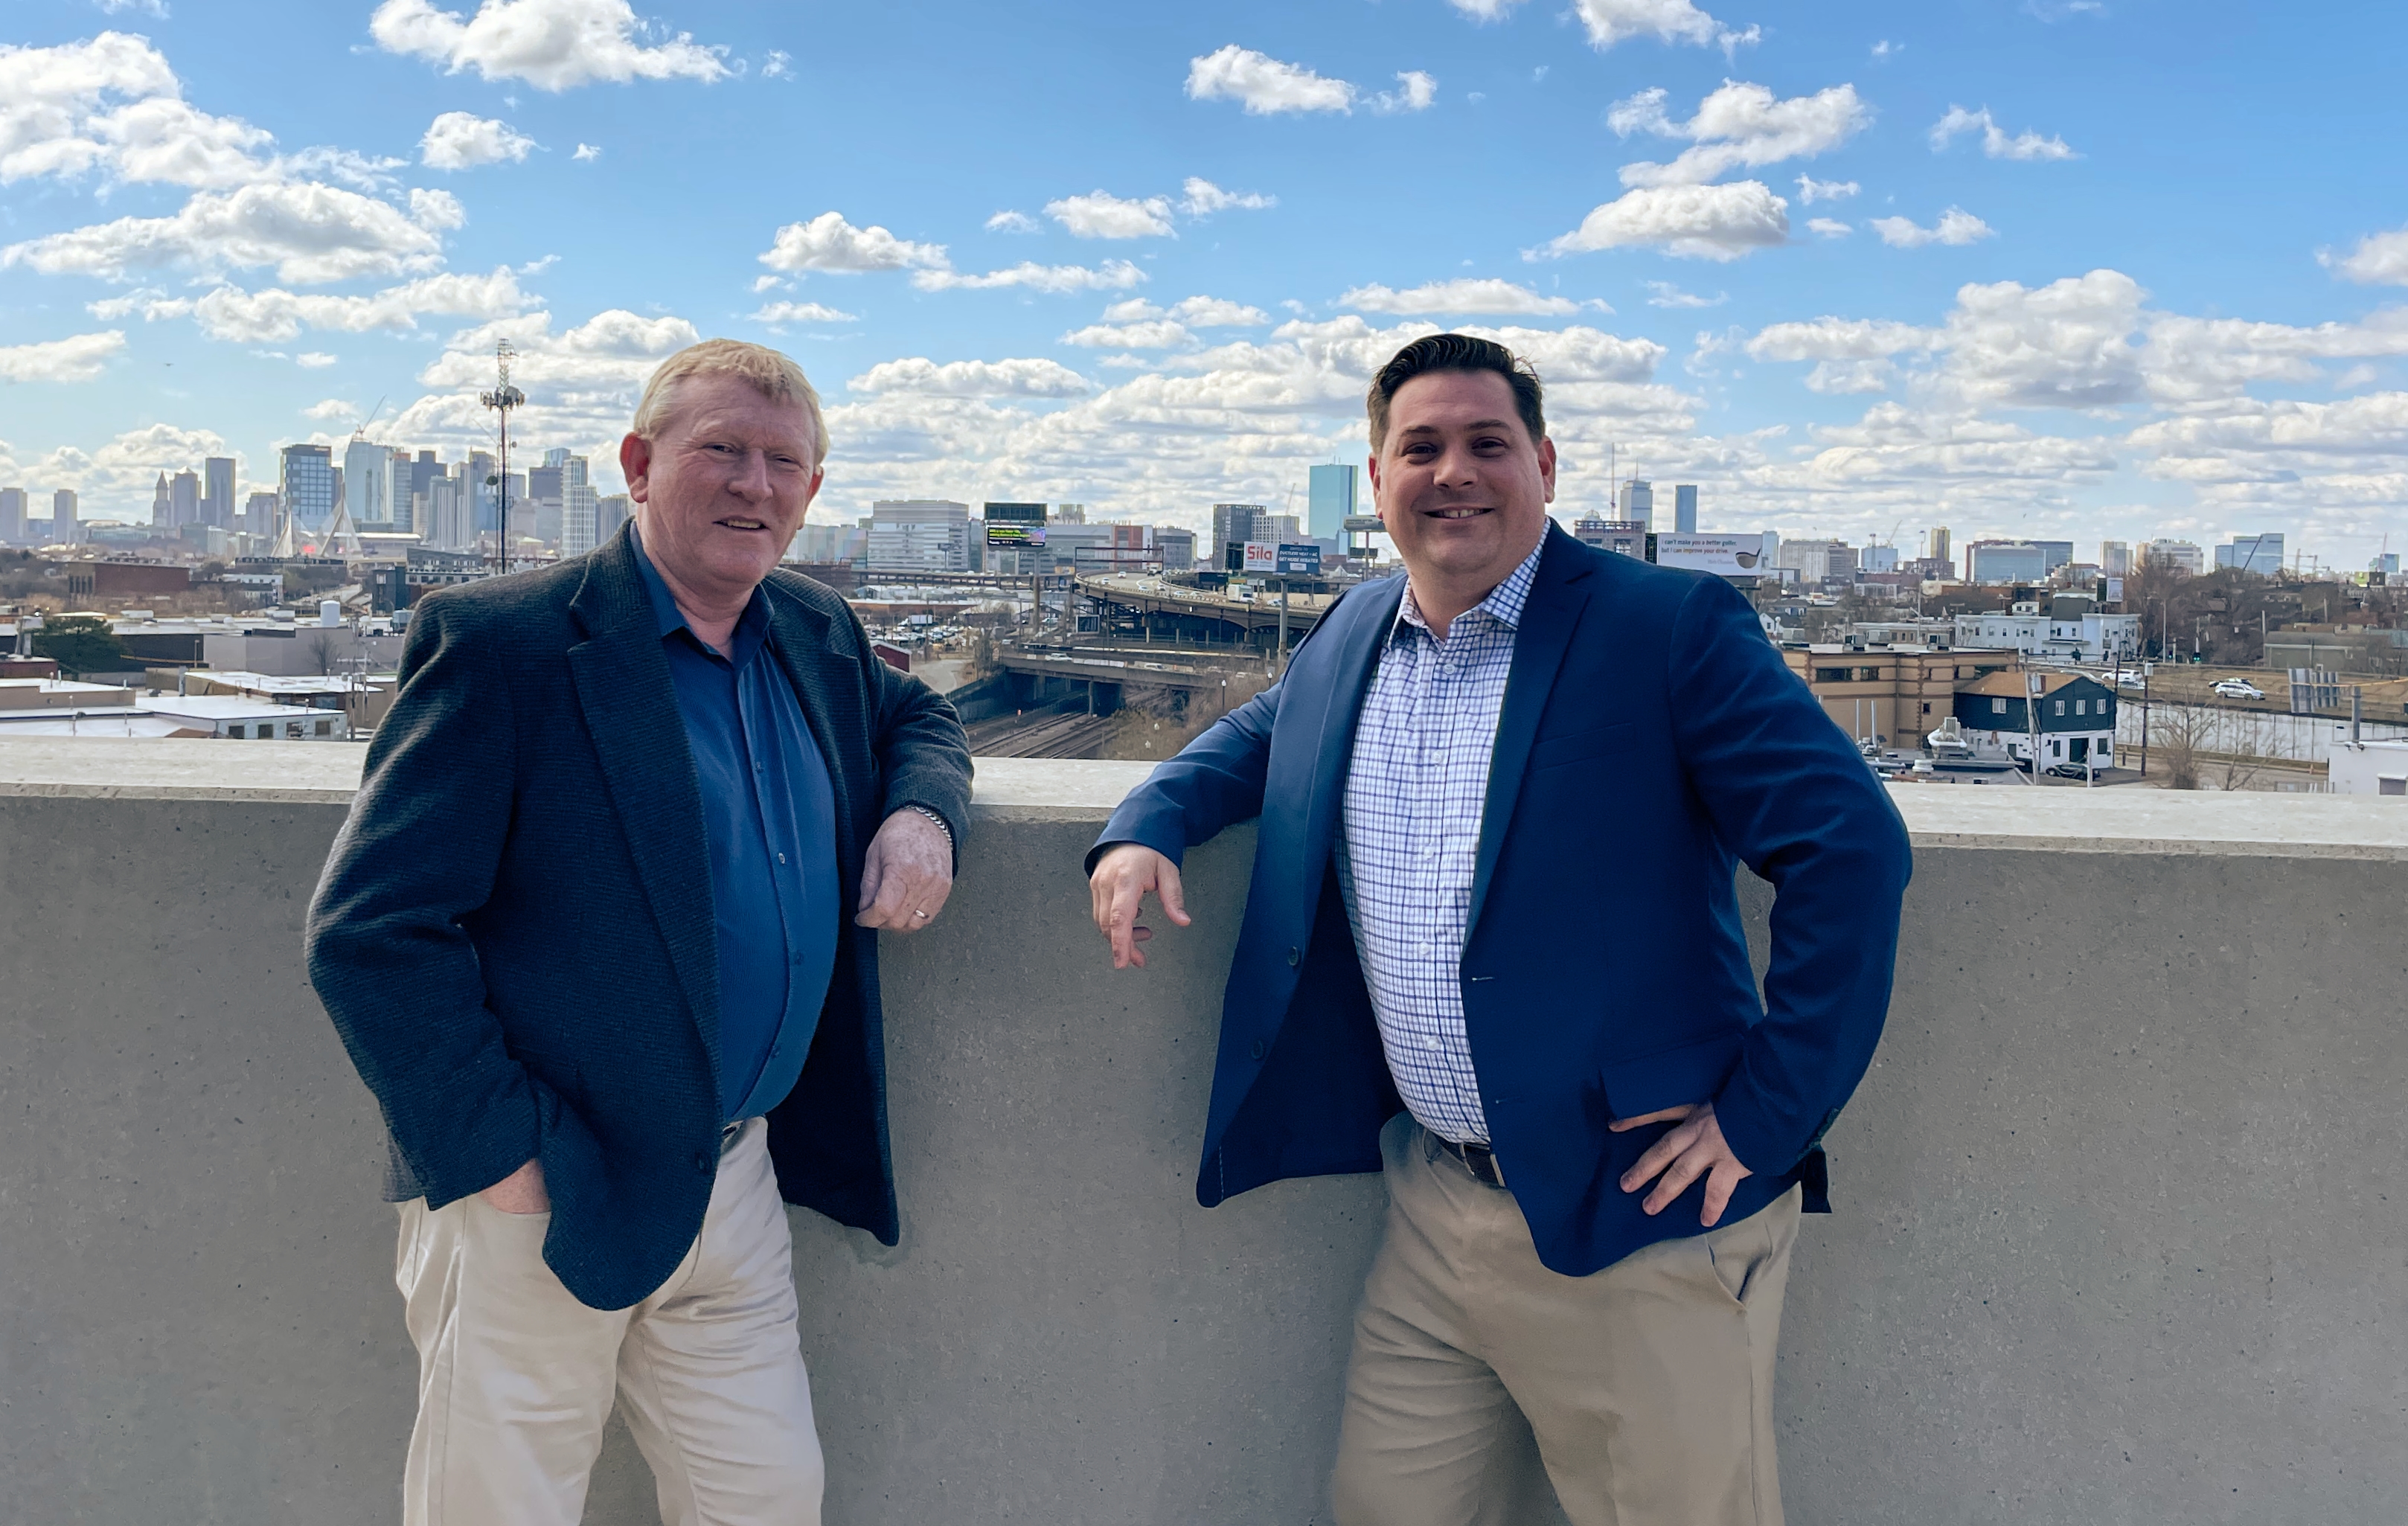 Picture of Steve Dowdy and Mike Smyth in front of a boston Skyline.